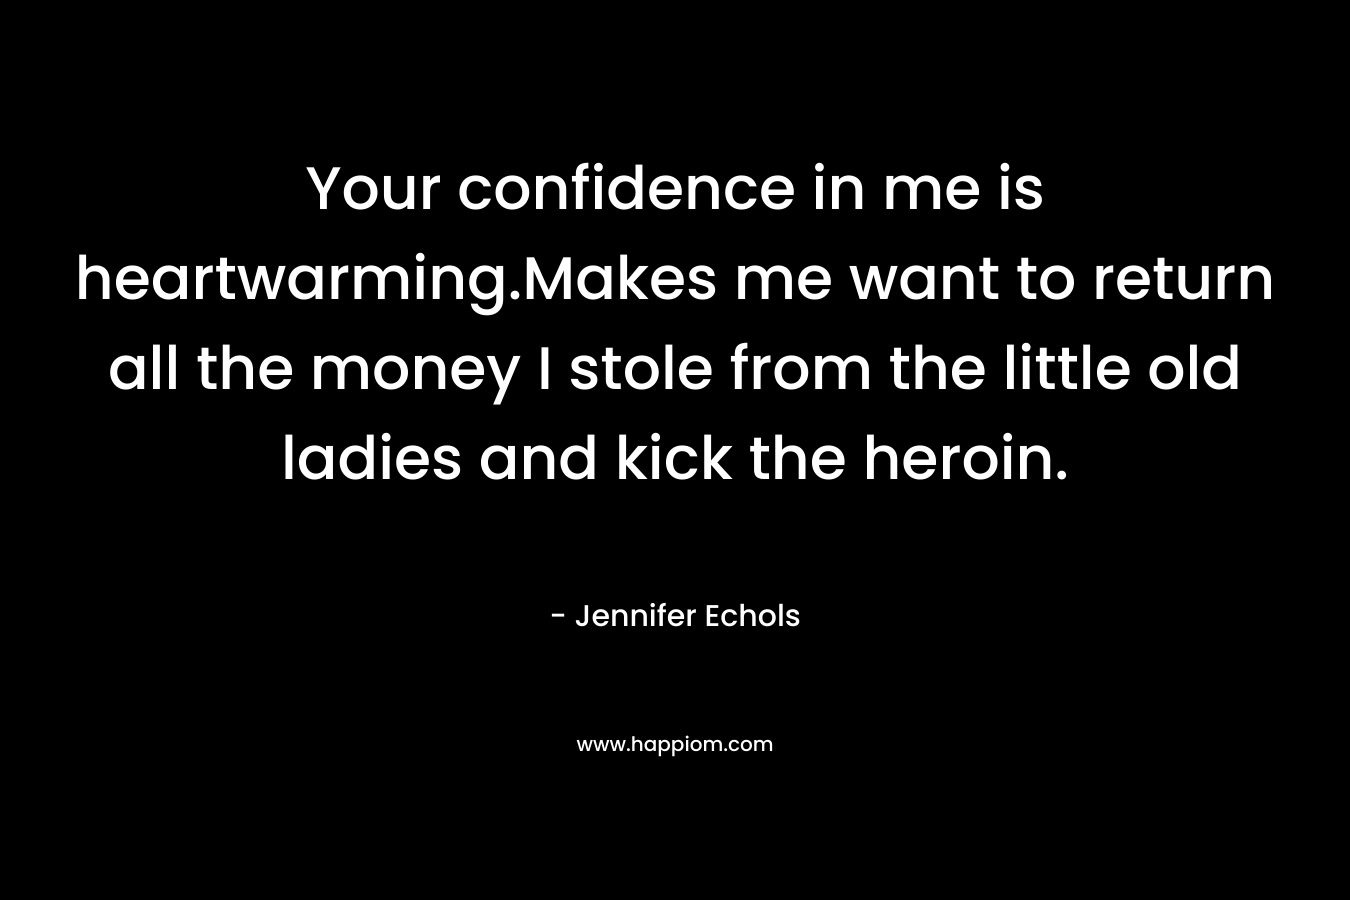 Your confidence in me is heartwarming.Makes me want to return all the money I stole from the little old ladies and kick the heroin. – Jennifer Echols